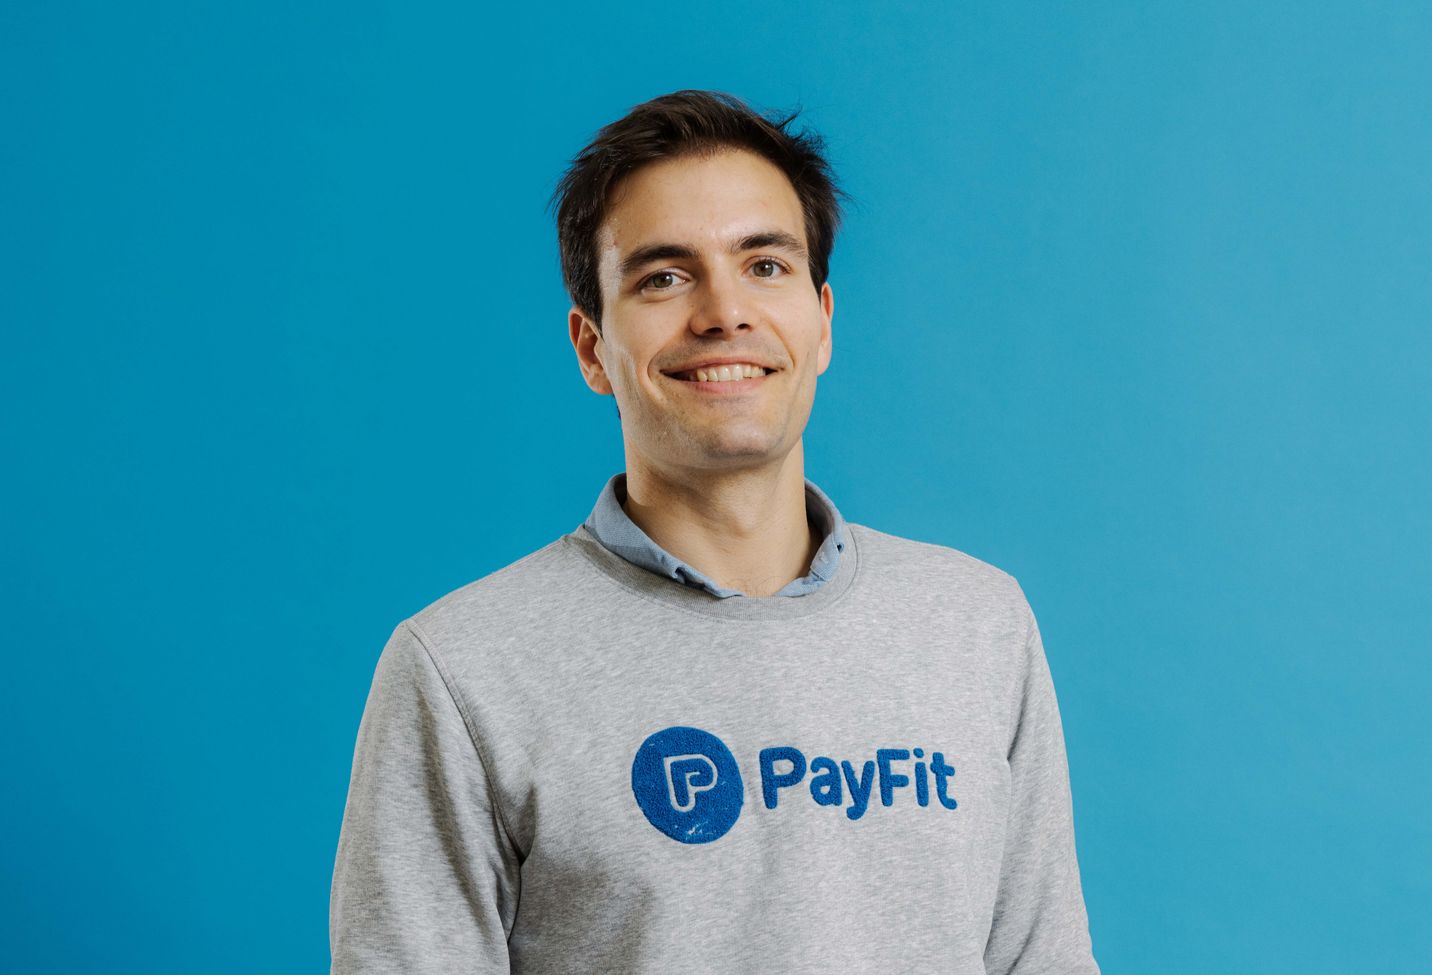 Firmin Zocchetto, the CEO and co-founder of PayFit, one of France’s latest unicorns